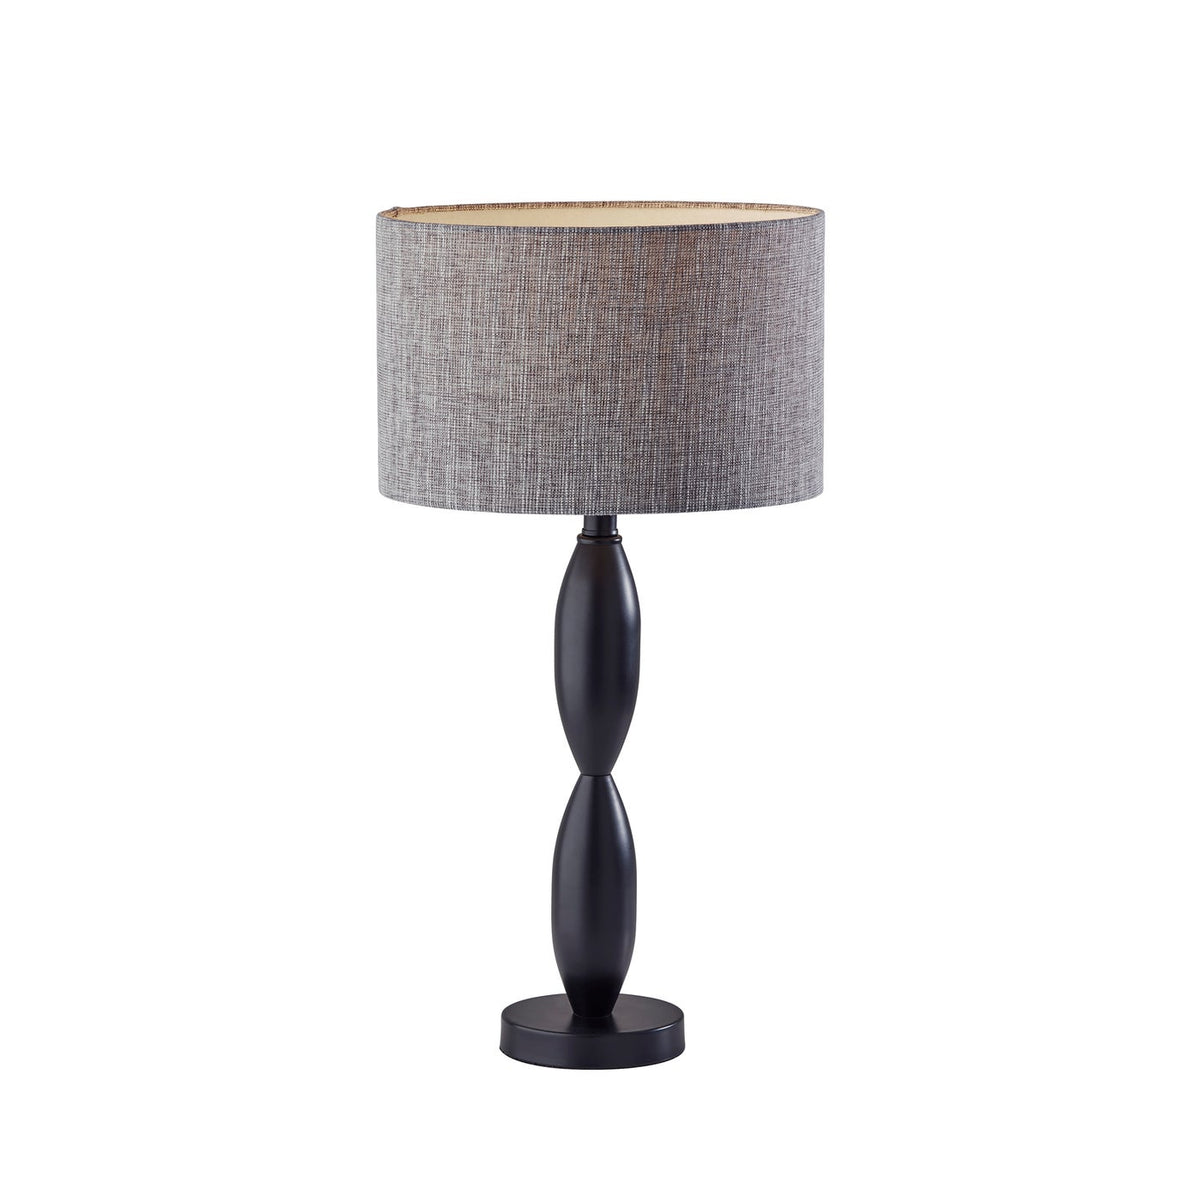 Adesso Home - 1602-01 - Table Lamp - Lance - Black